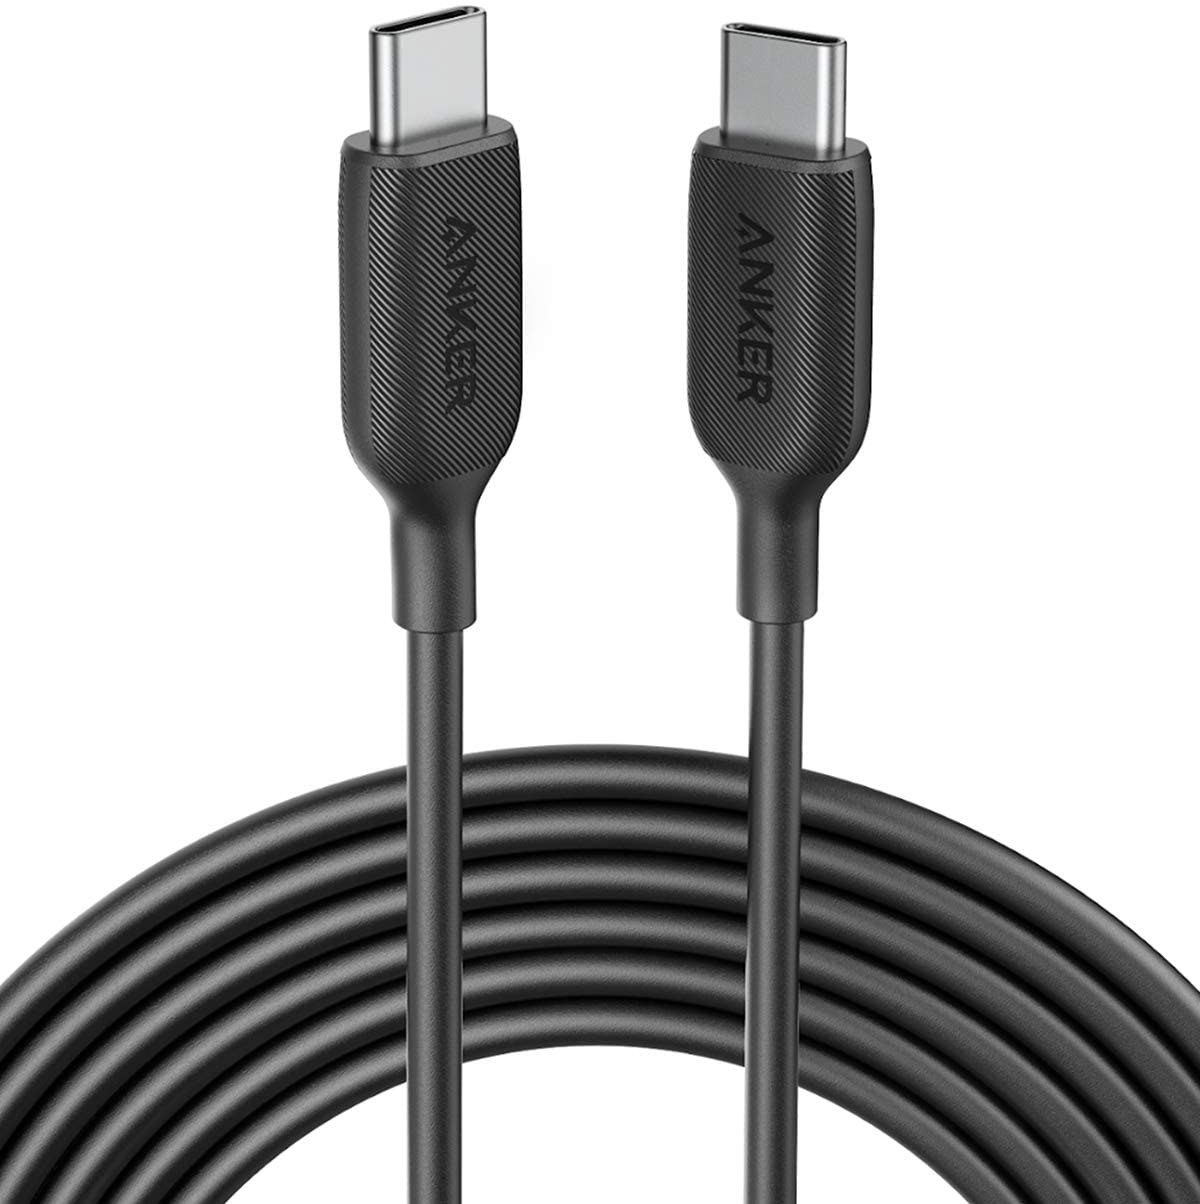 VR Link Cable - Anker US